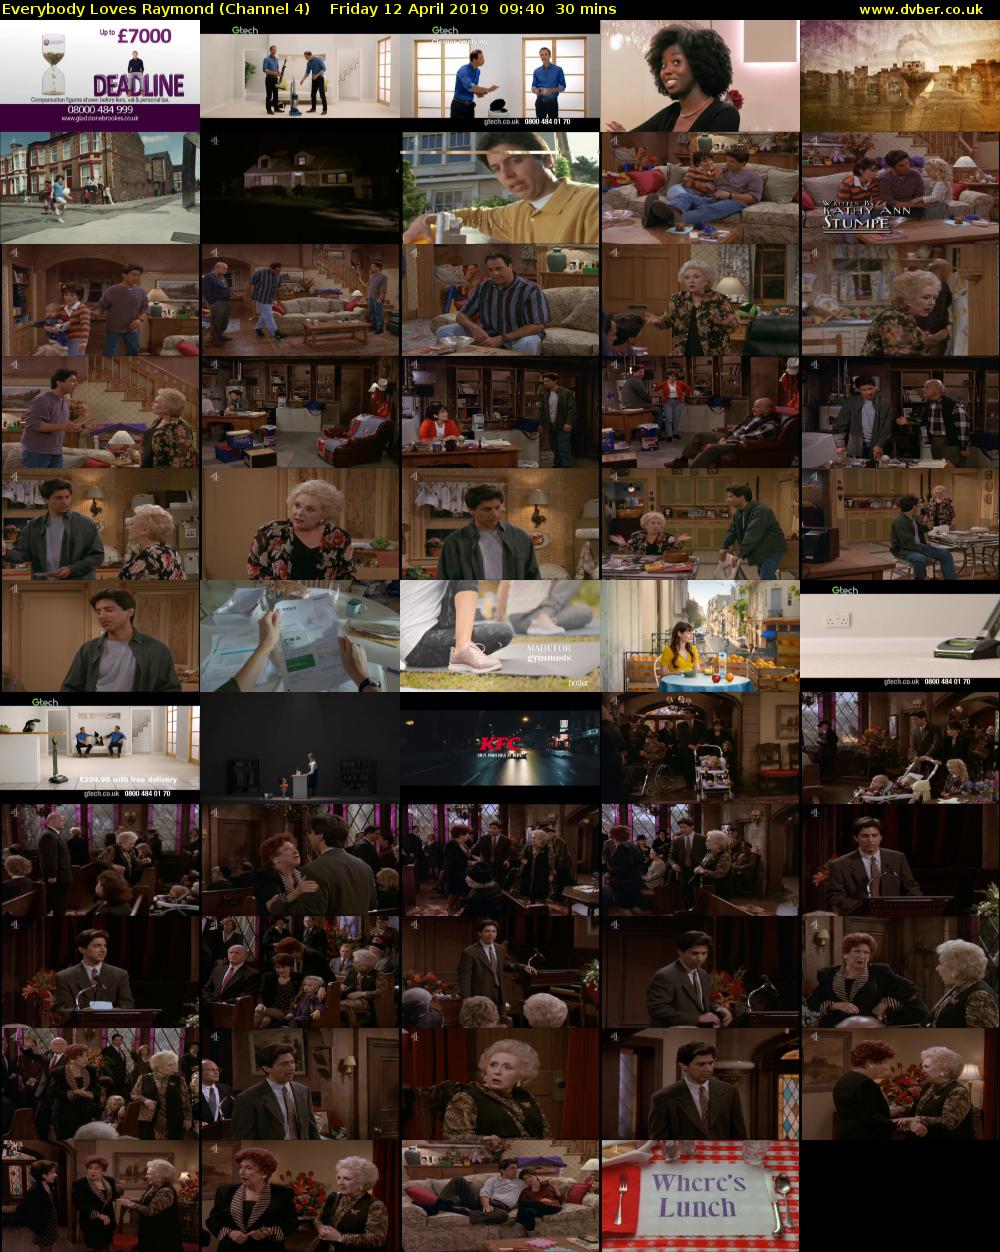 Everybody Loves Raymond (Channel 4) Friday 12 April 2019 09:40 - 10:10